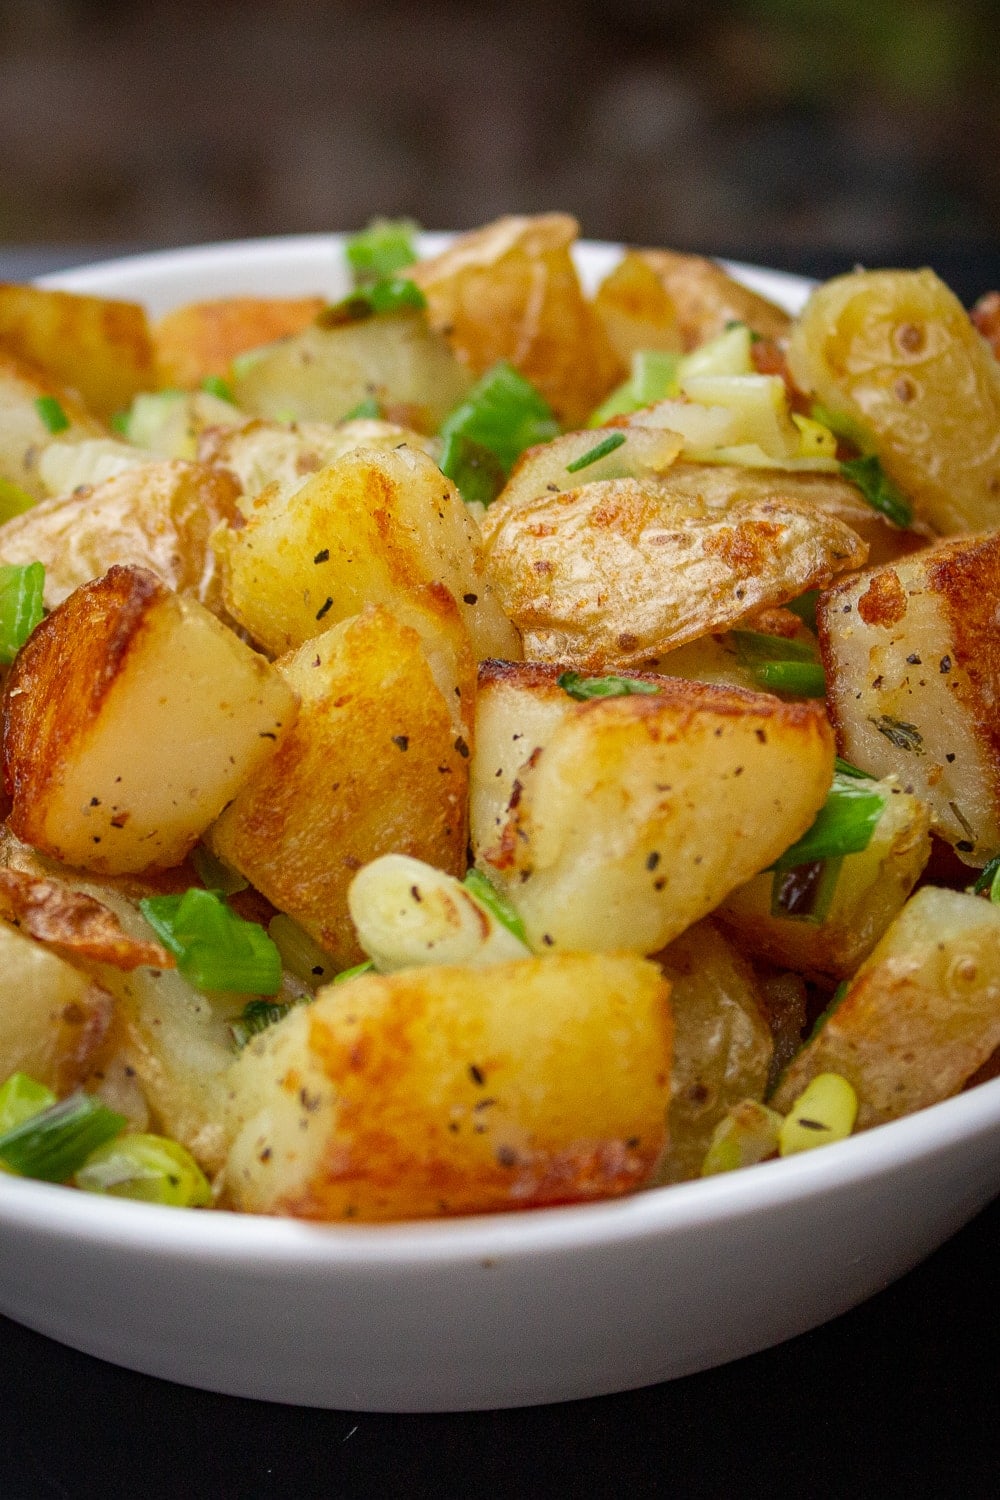 bowl of fried potatoes and onions p1